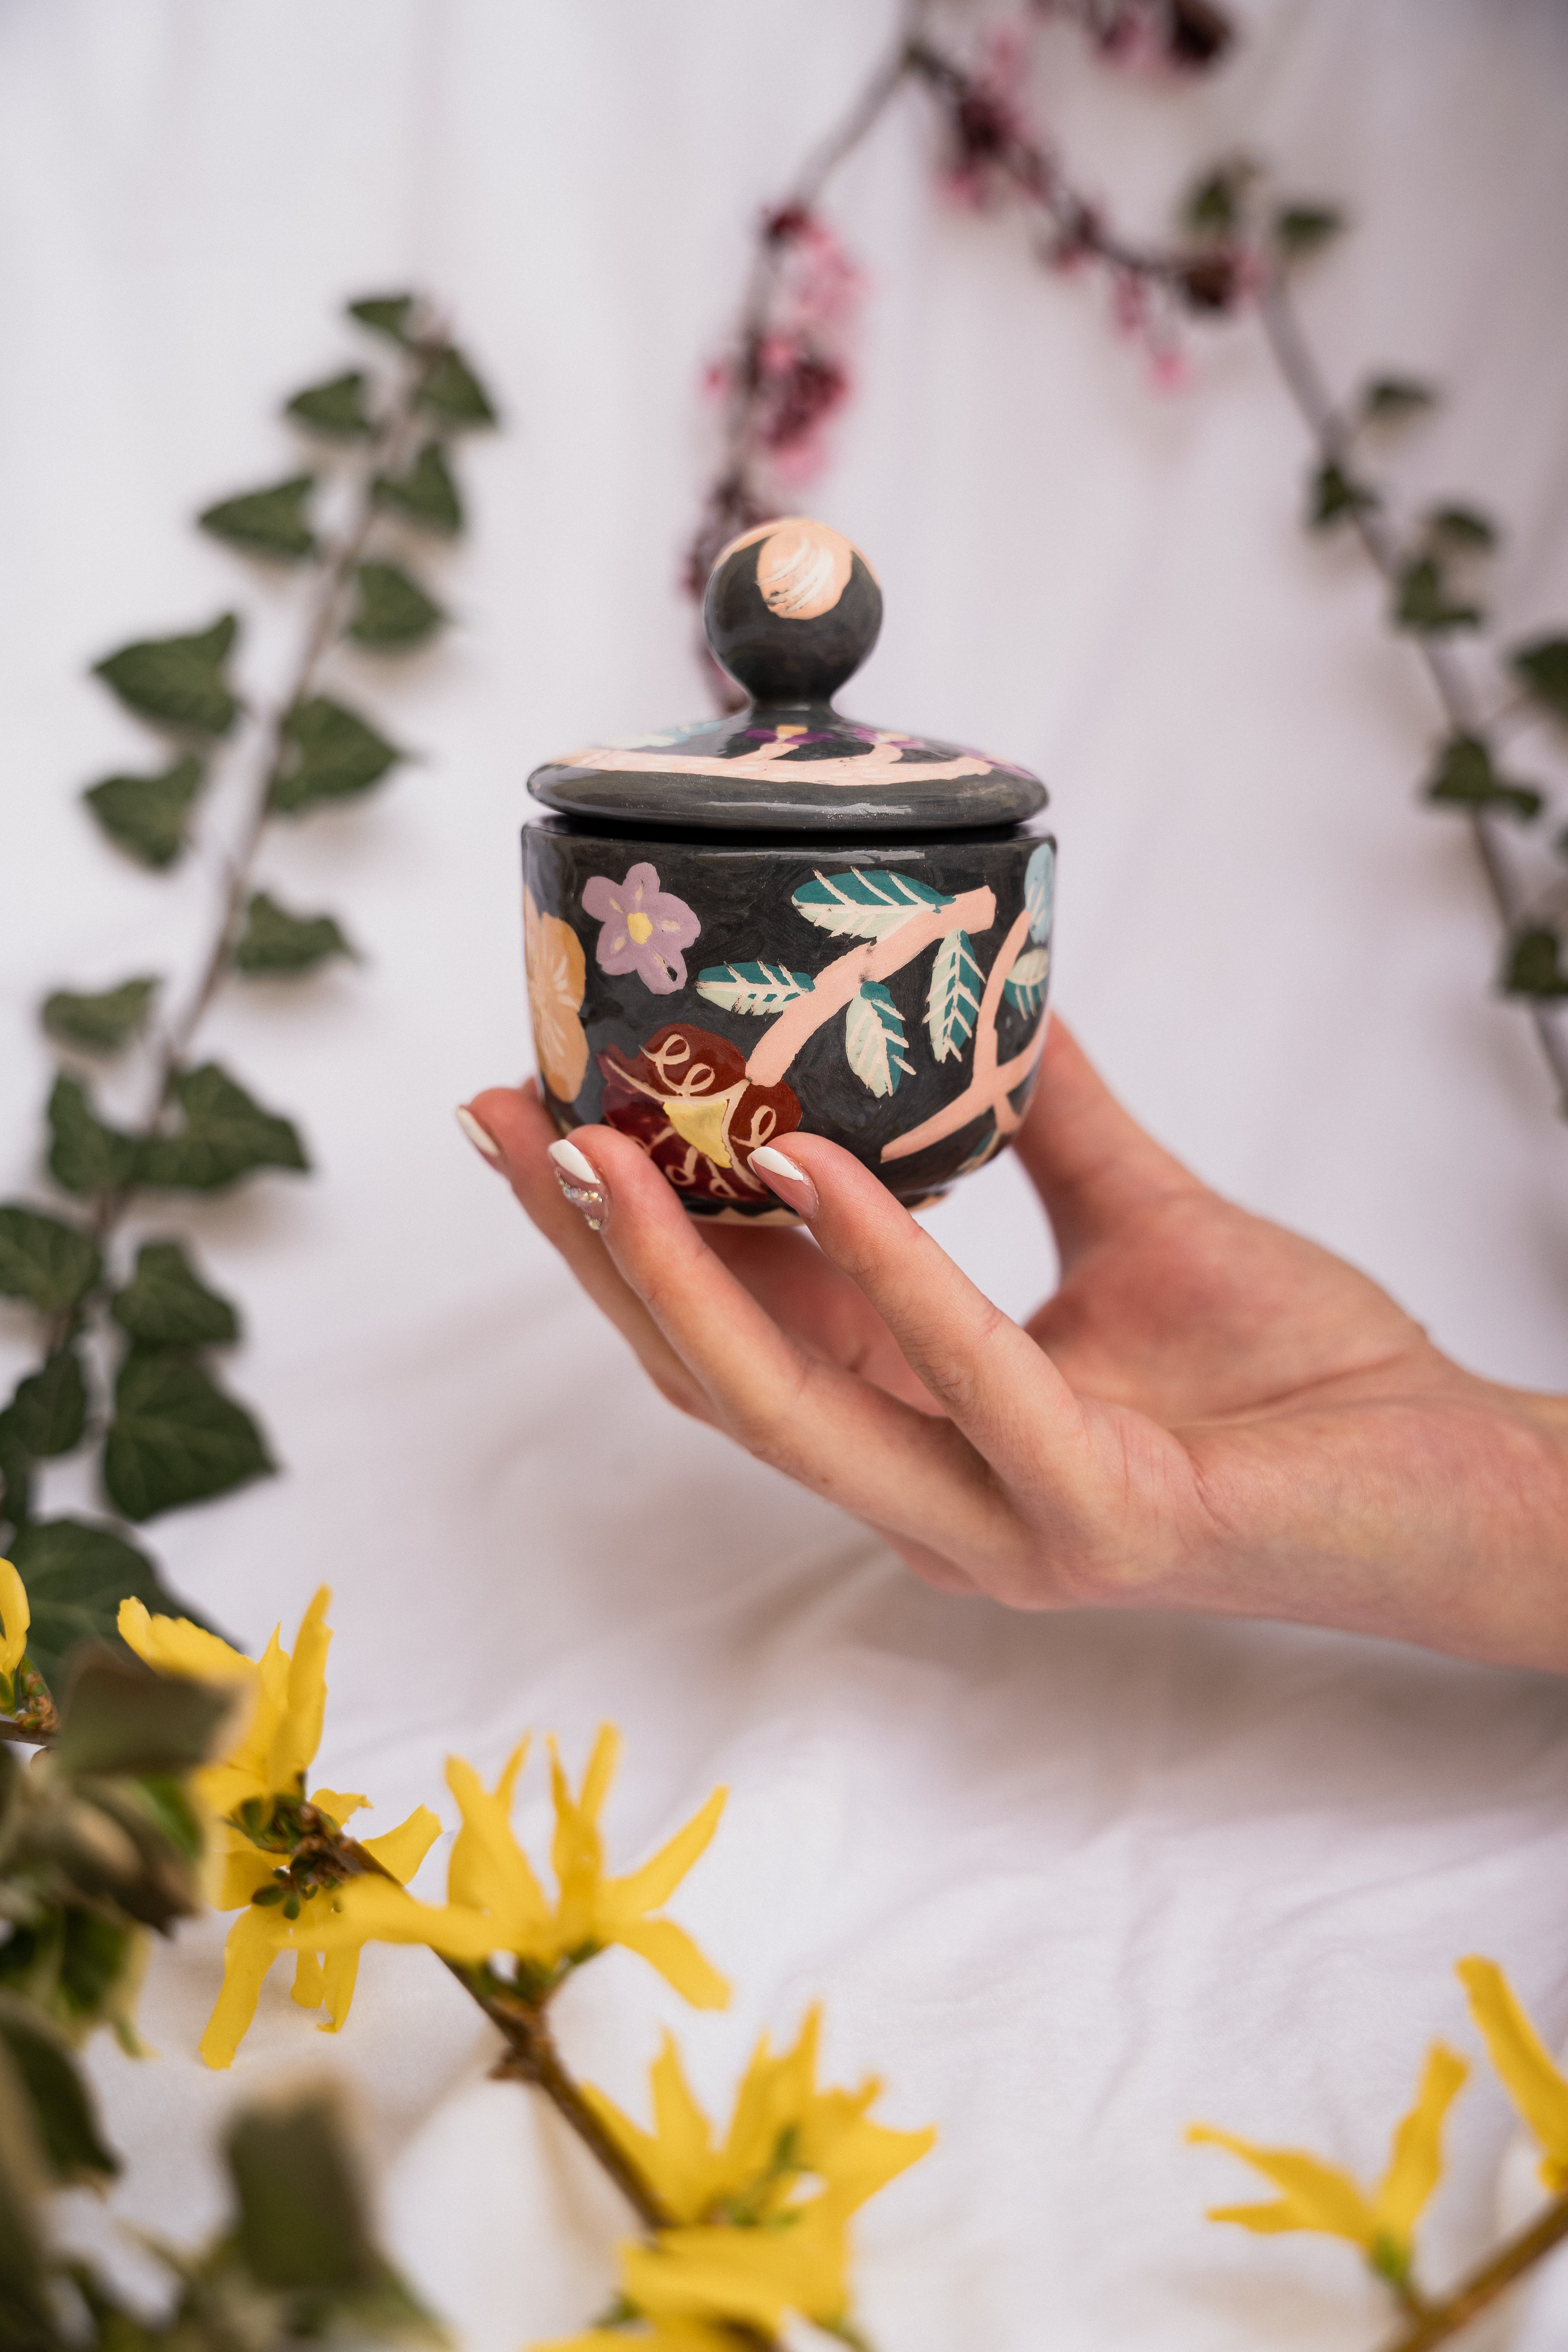 Mother's Day Gift: Soy Candle in Spring Flower Ceramic Holder